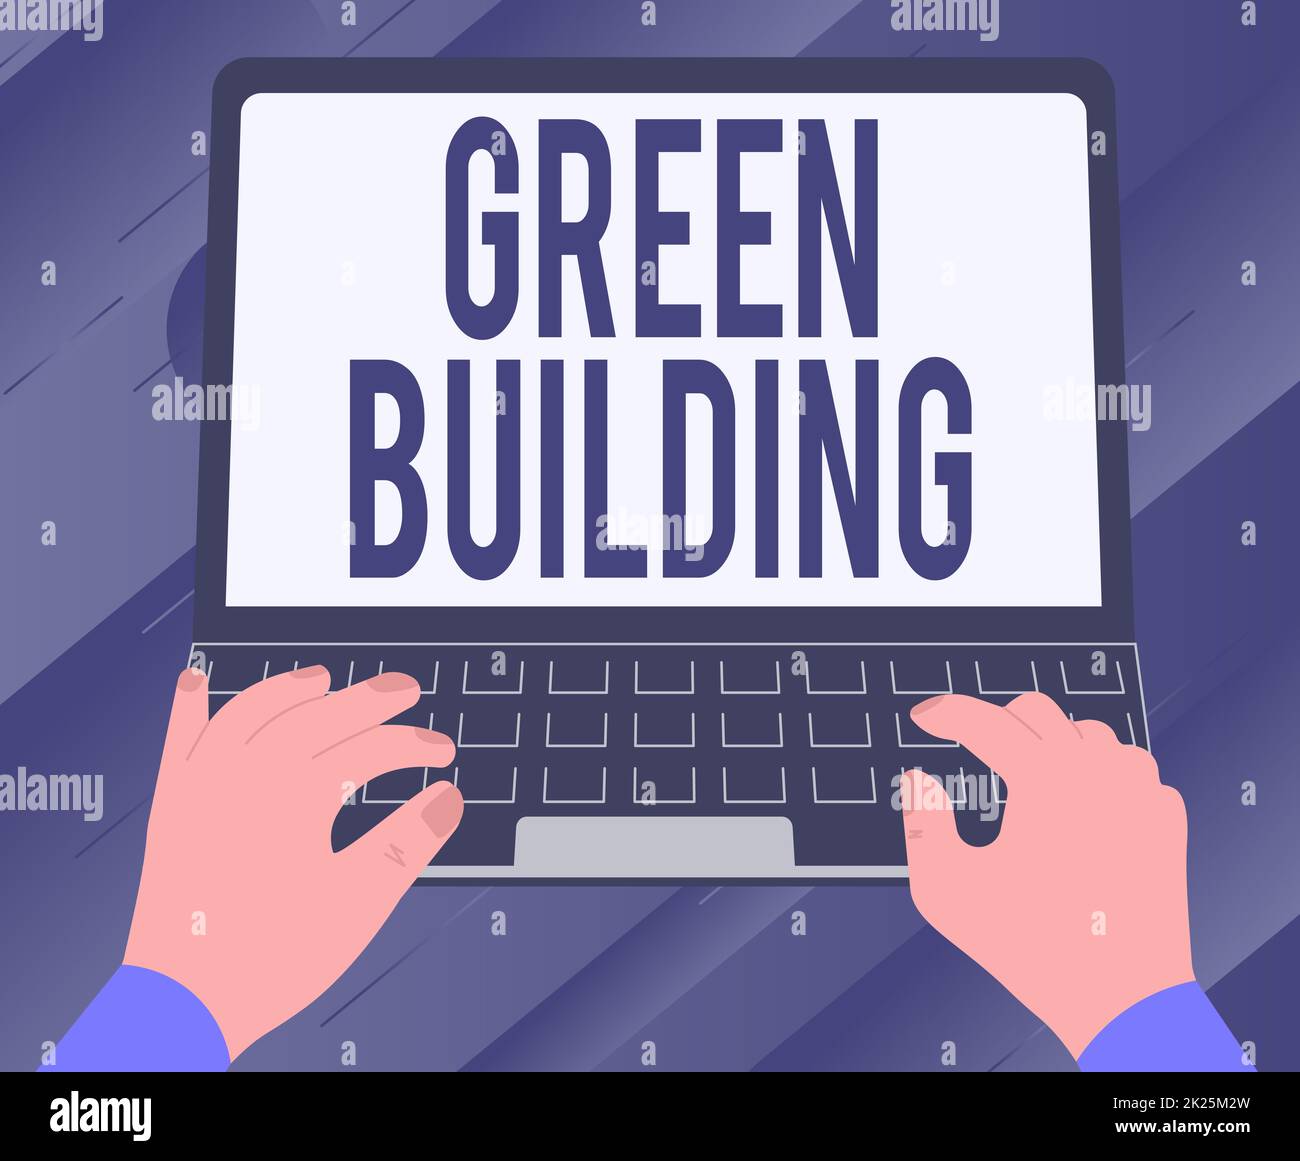 Conceptual display Green Building. Business approach A structure that is environmentally responsible Sustainable Illustration Of A Busy Hand Working On Laptop Searching For Ideas. Stock Photo